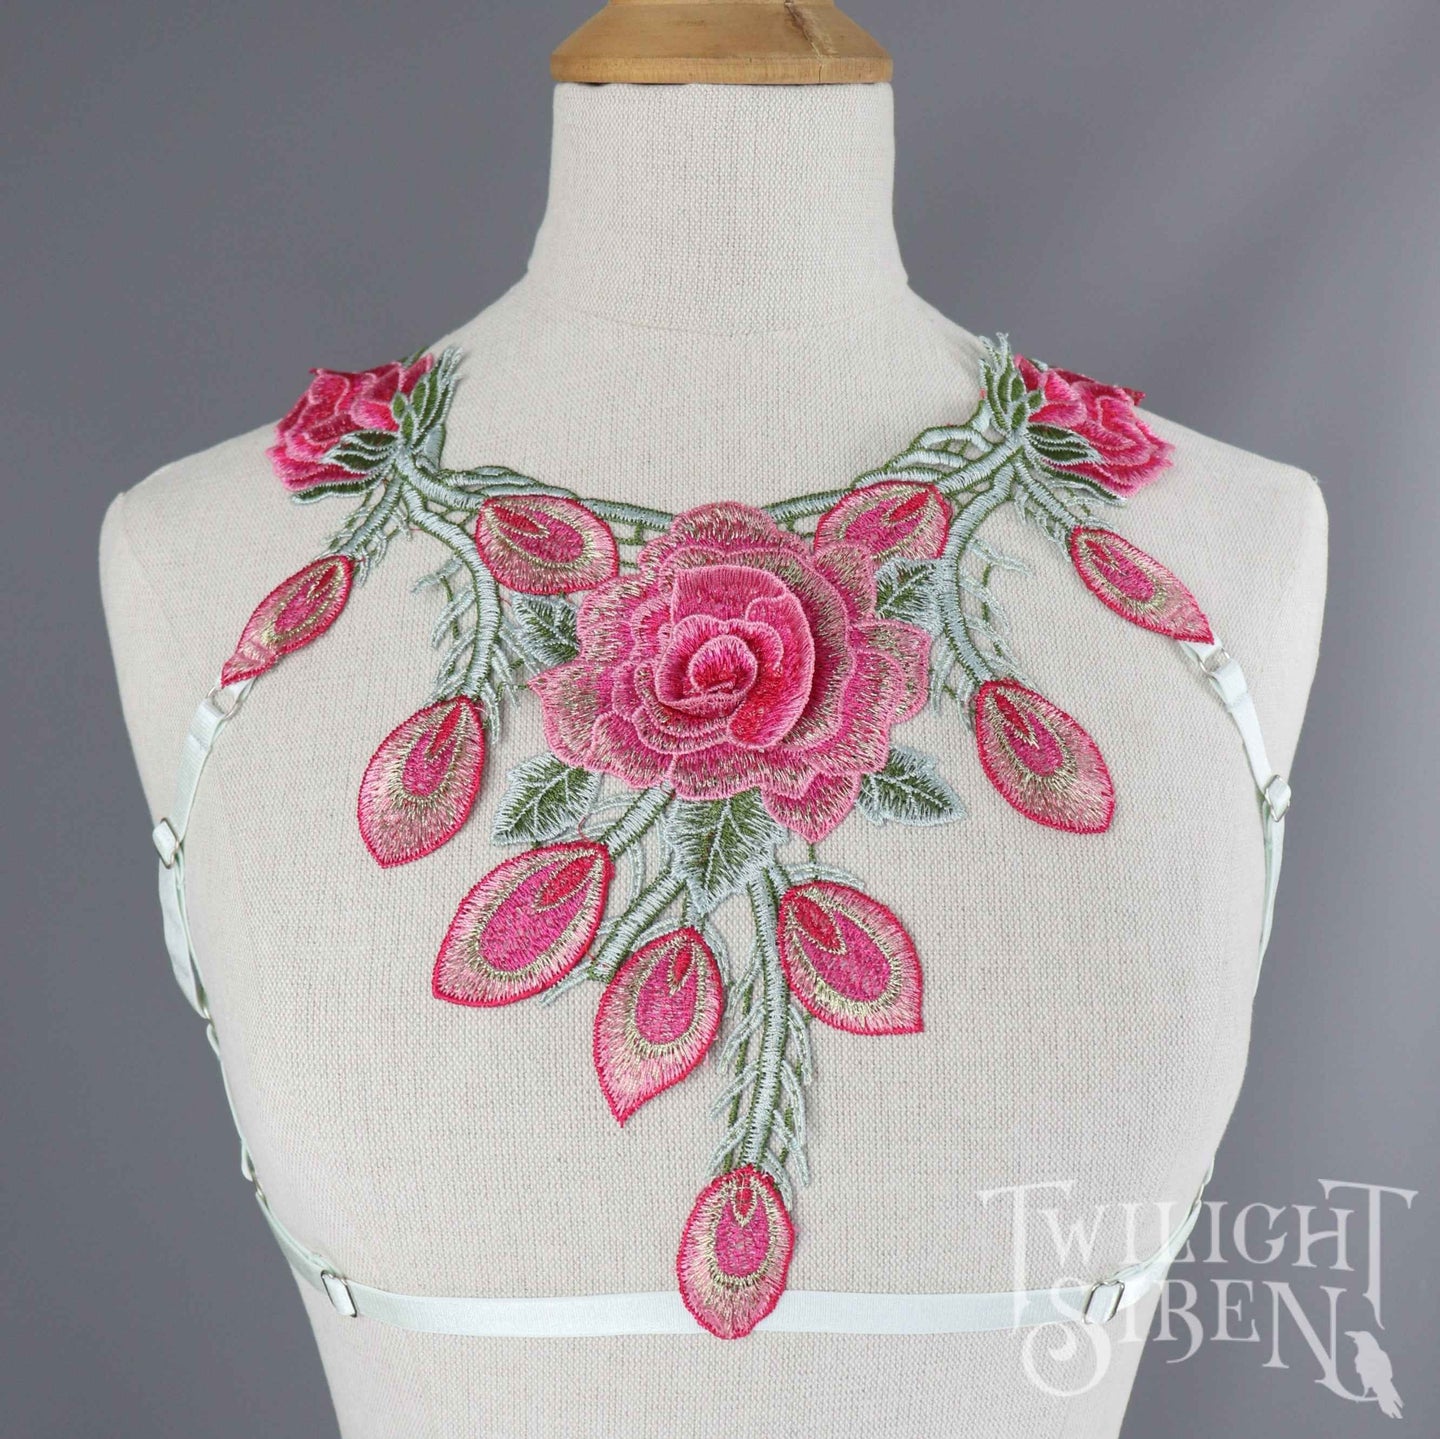 PINK FLORAL LACE BODY HARNESS BRALET